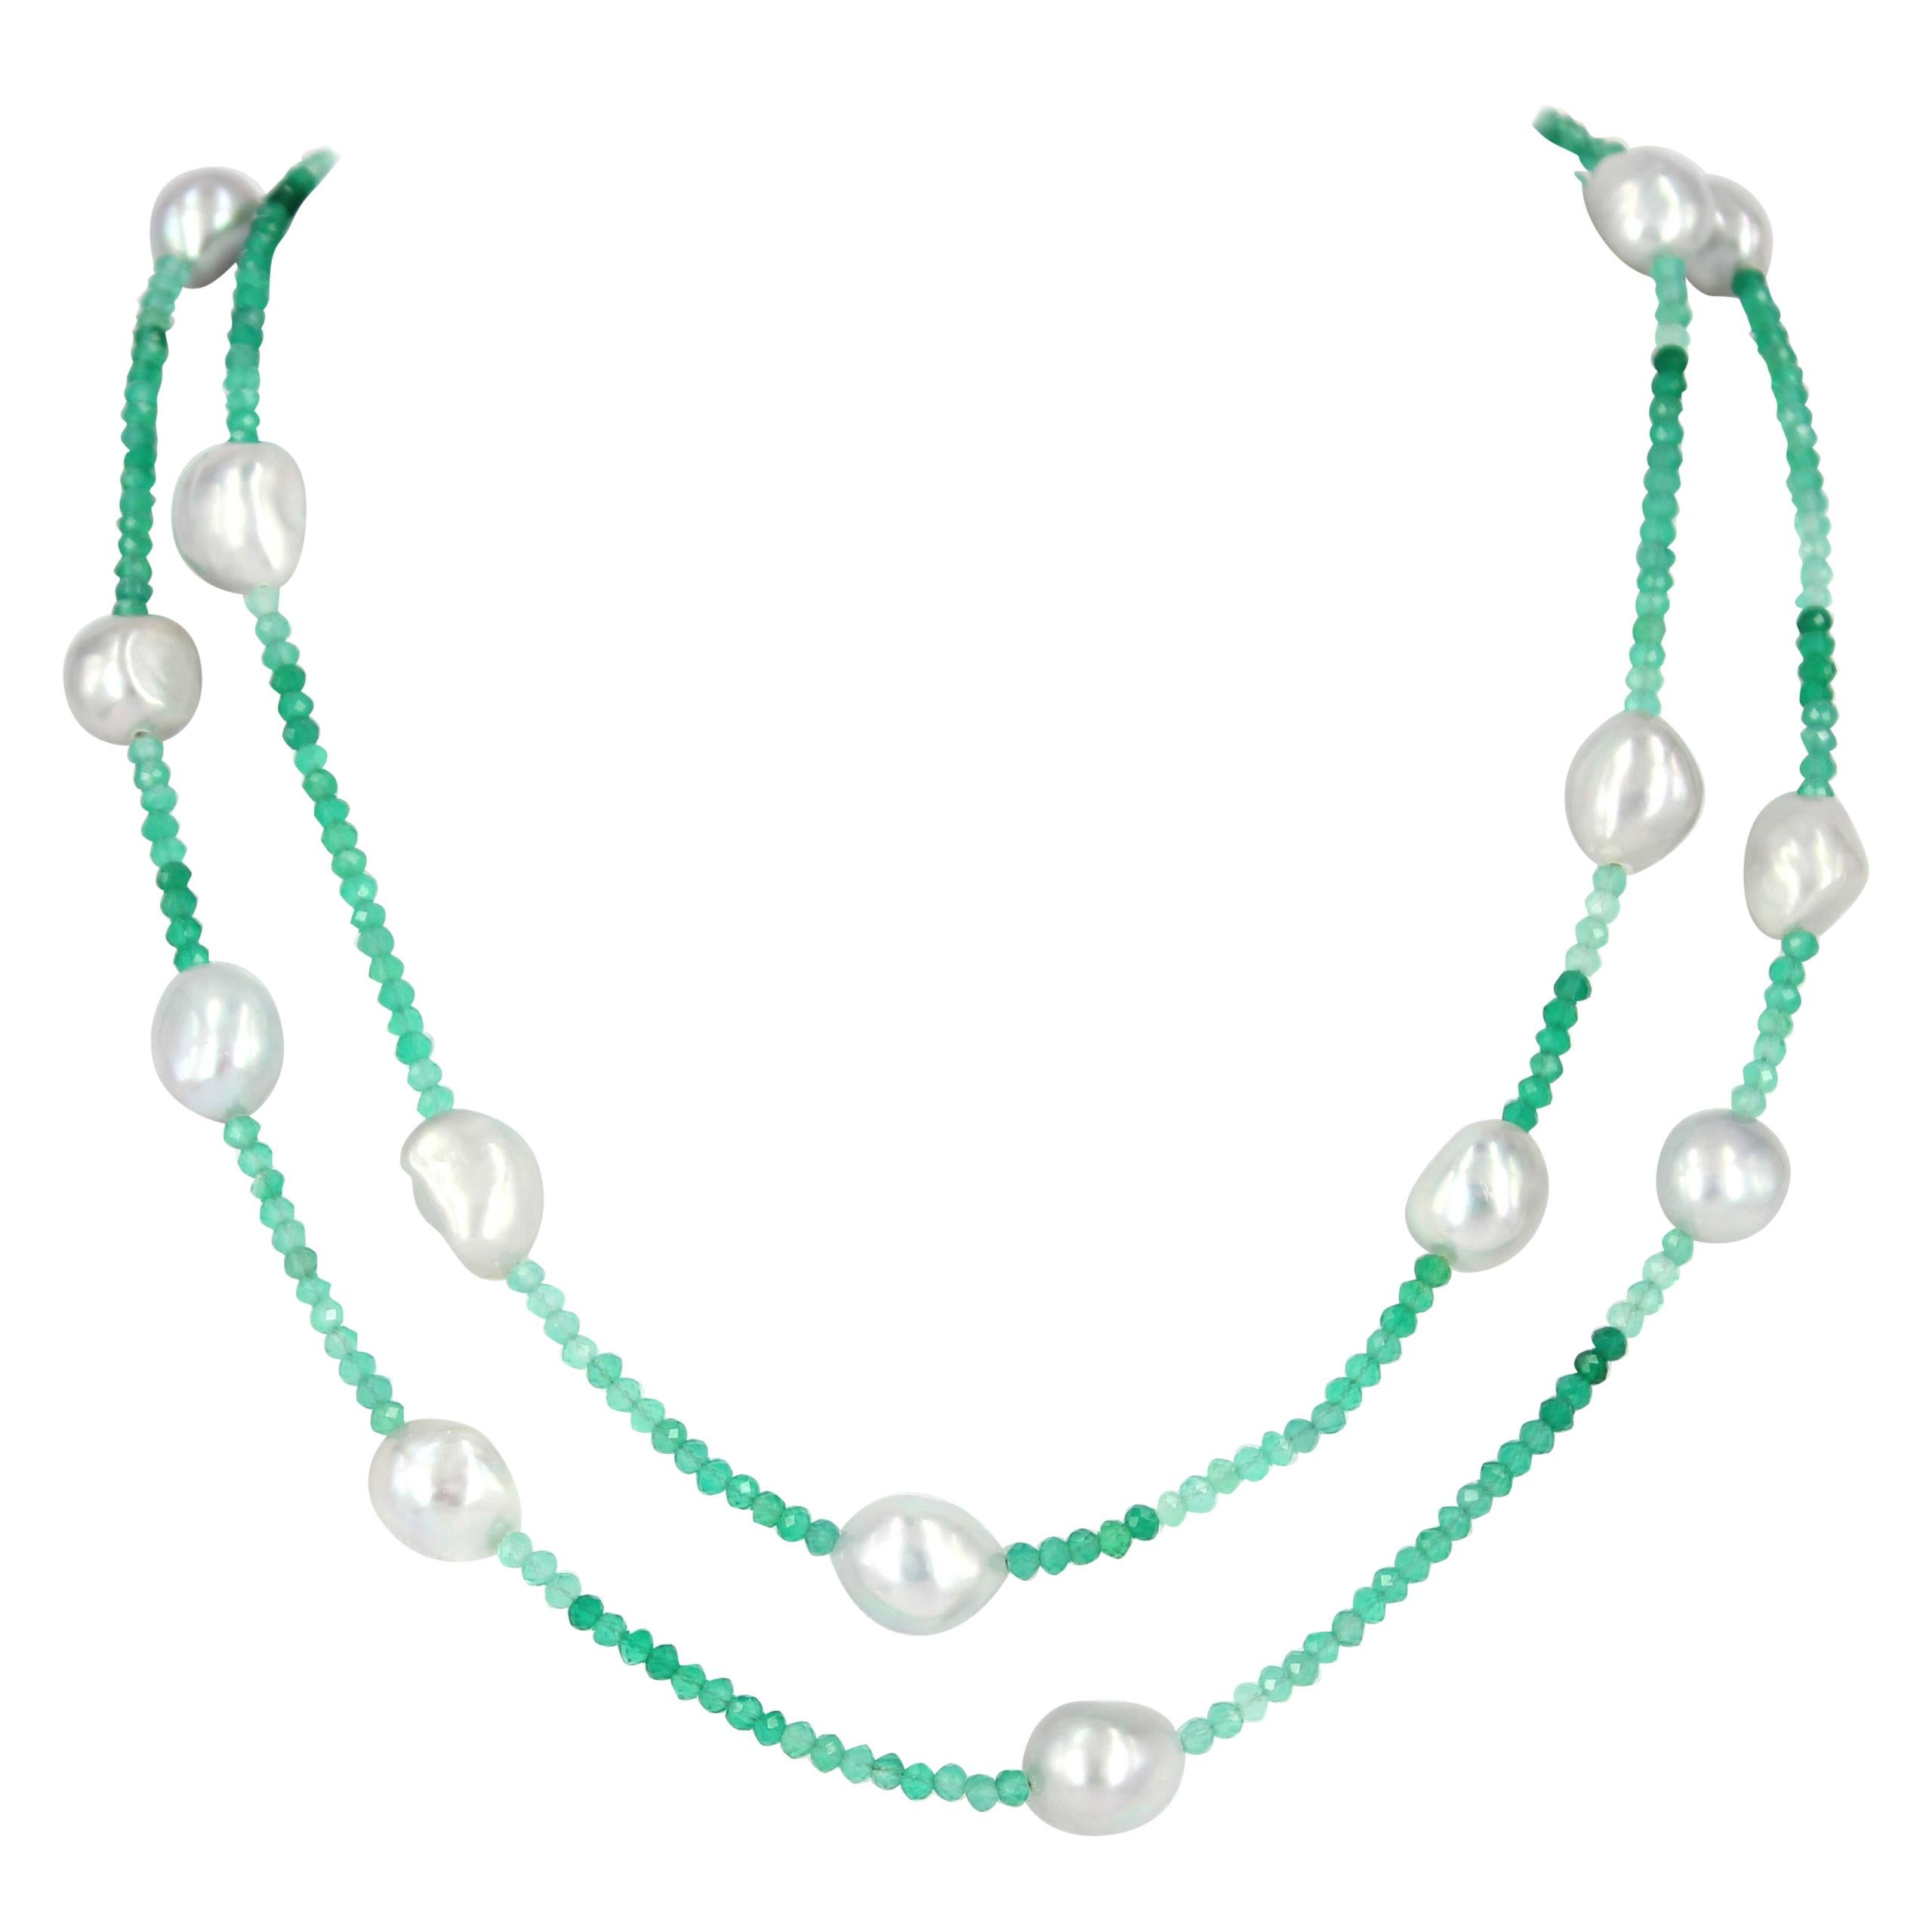 Decadent Jewels Green Onyx Grey Fresh Water Pearl Silver Necklace